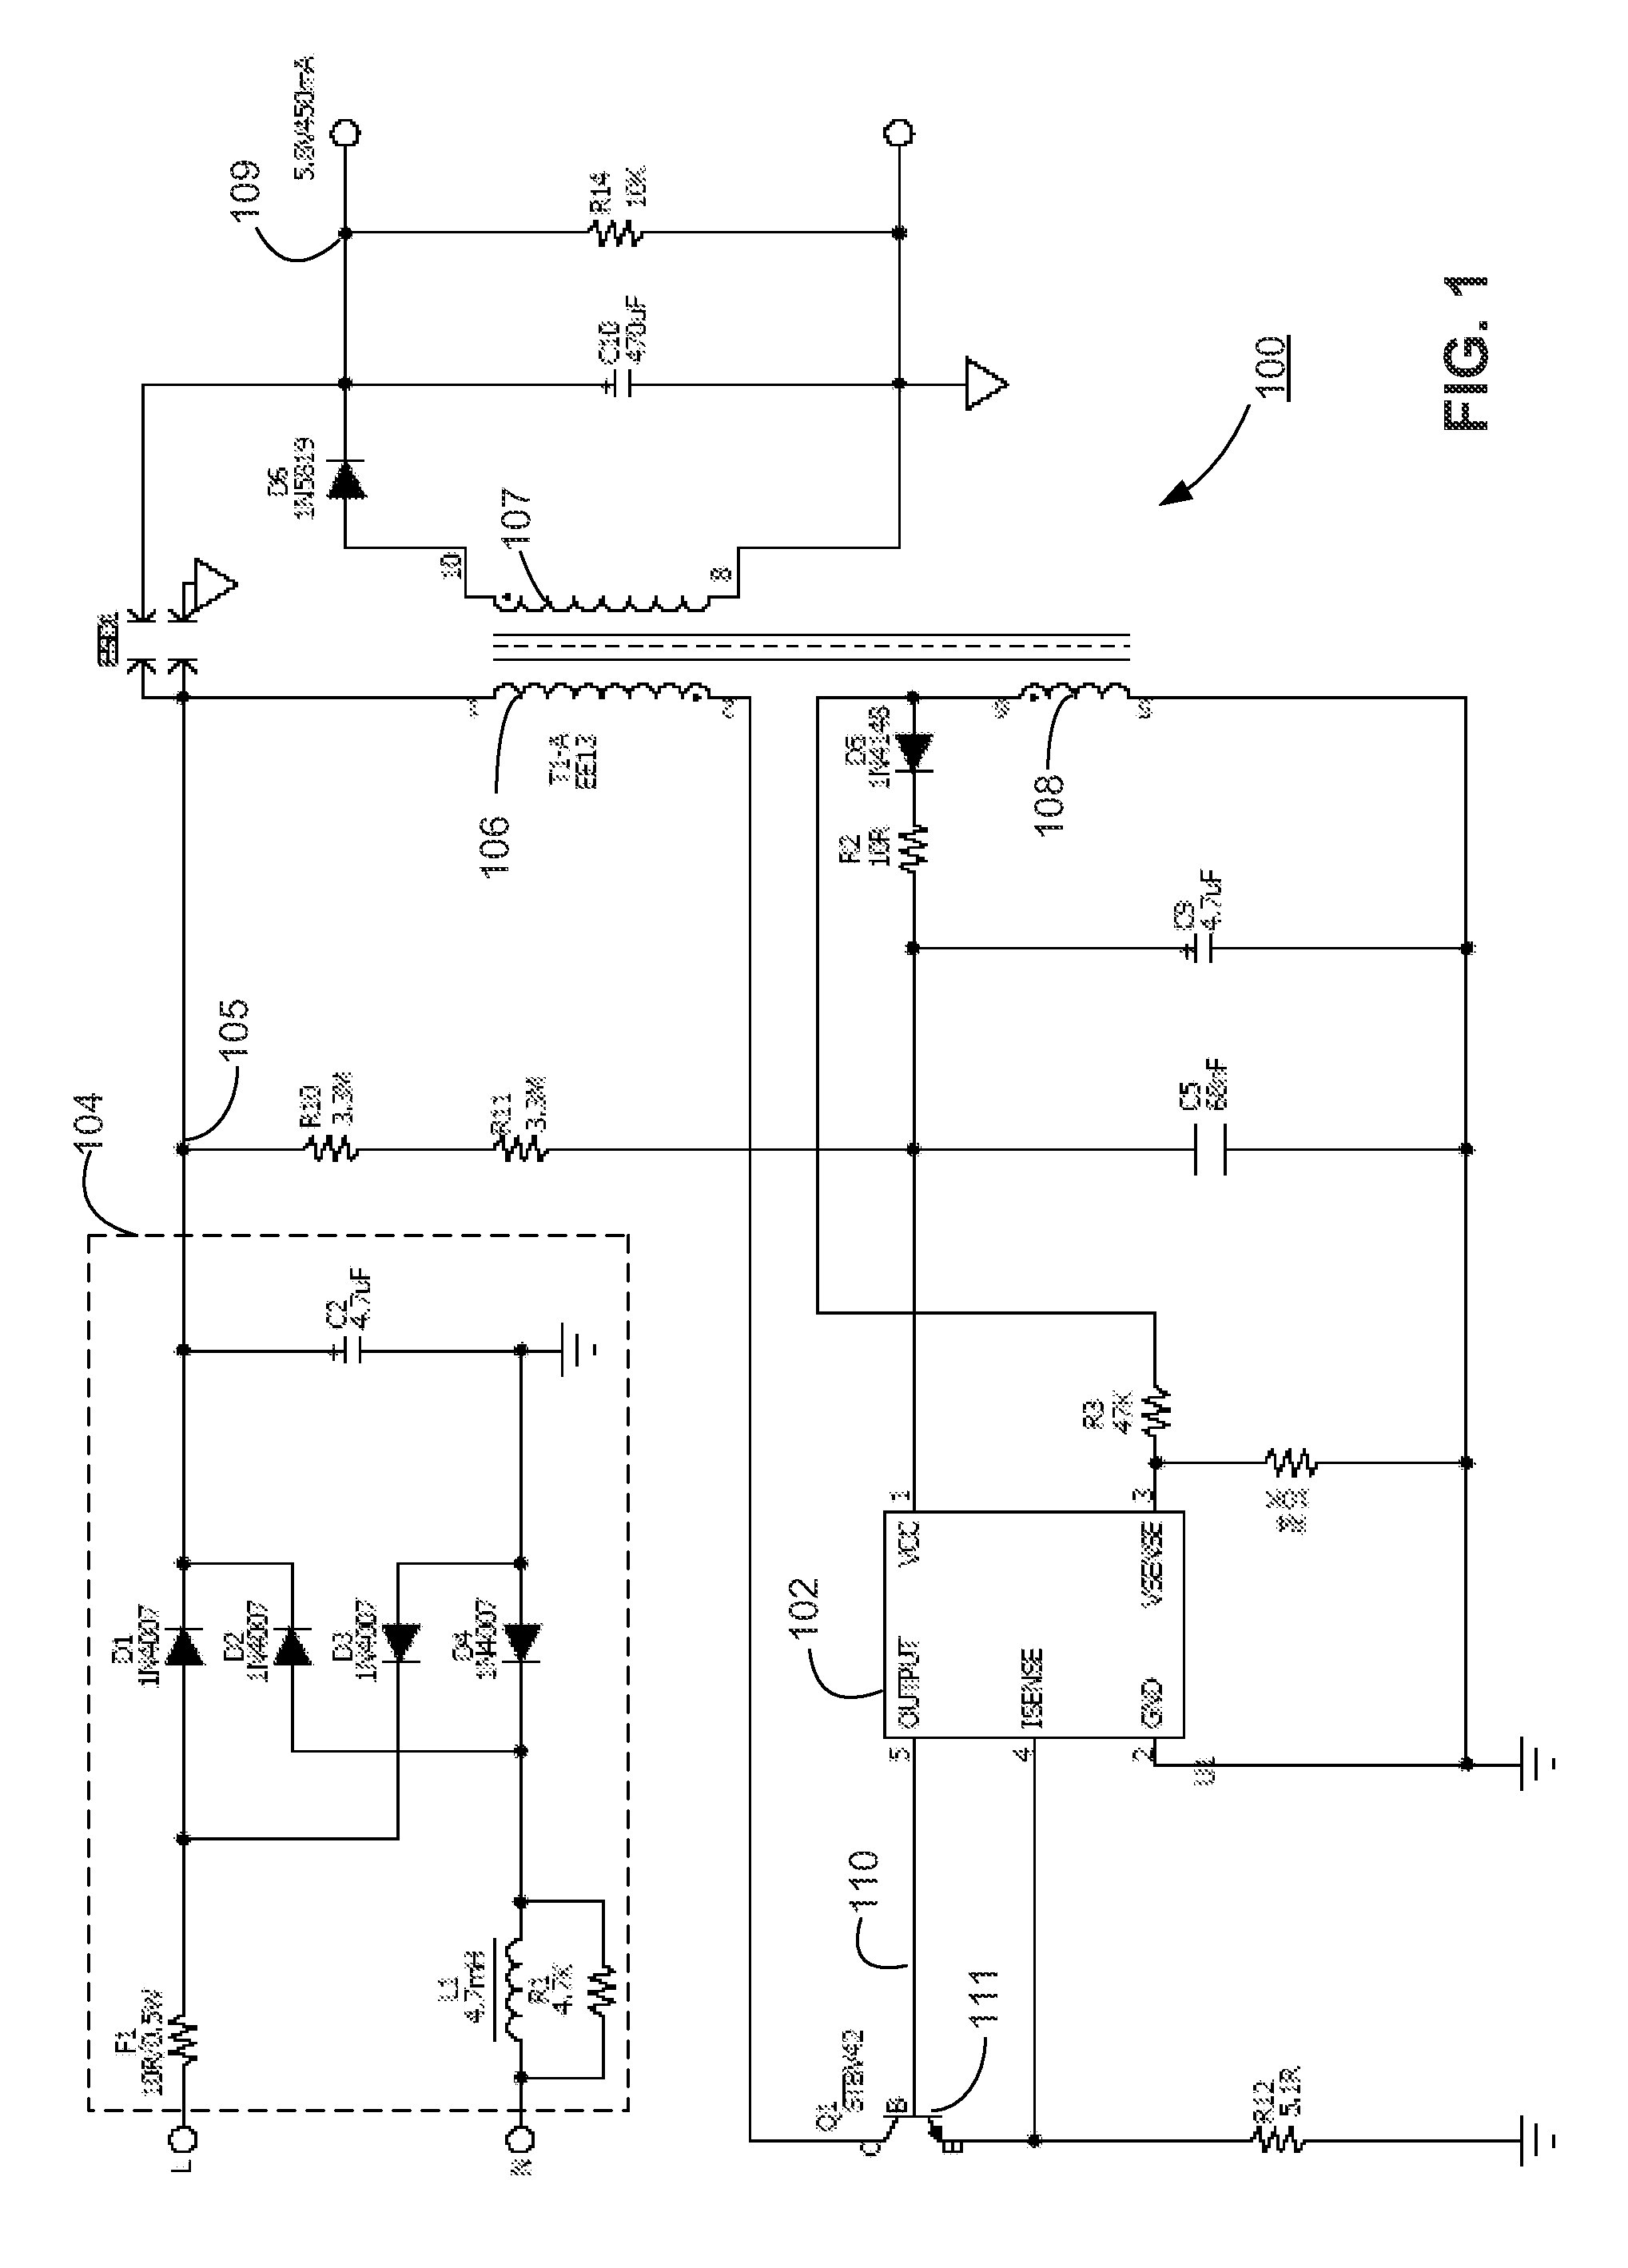 Regulation for power supply mode transition to low-load operation